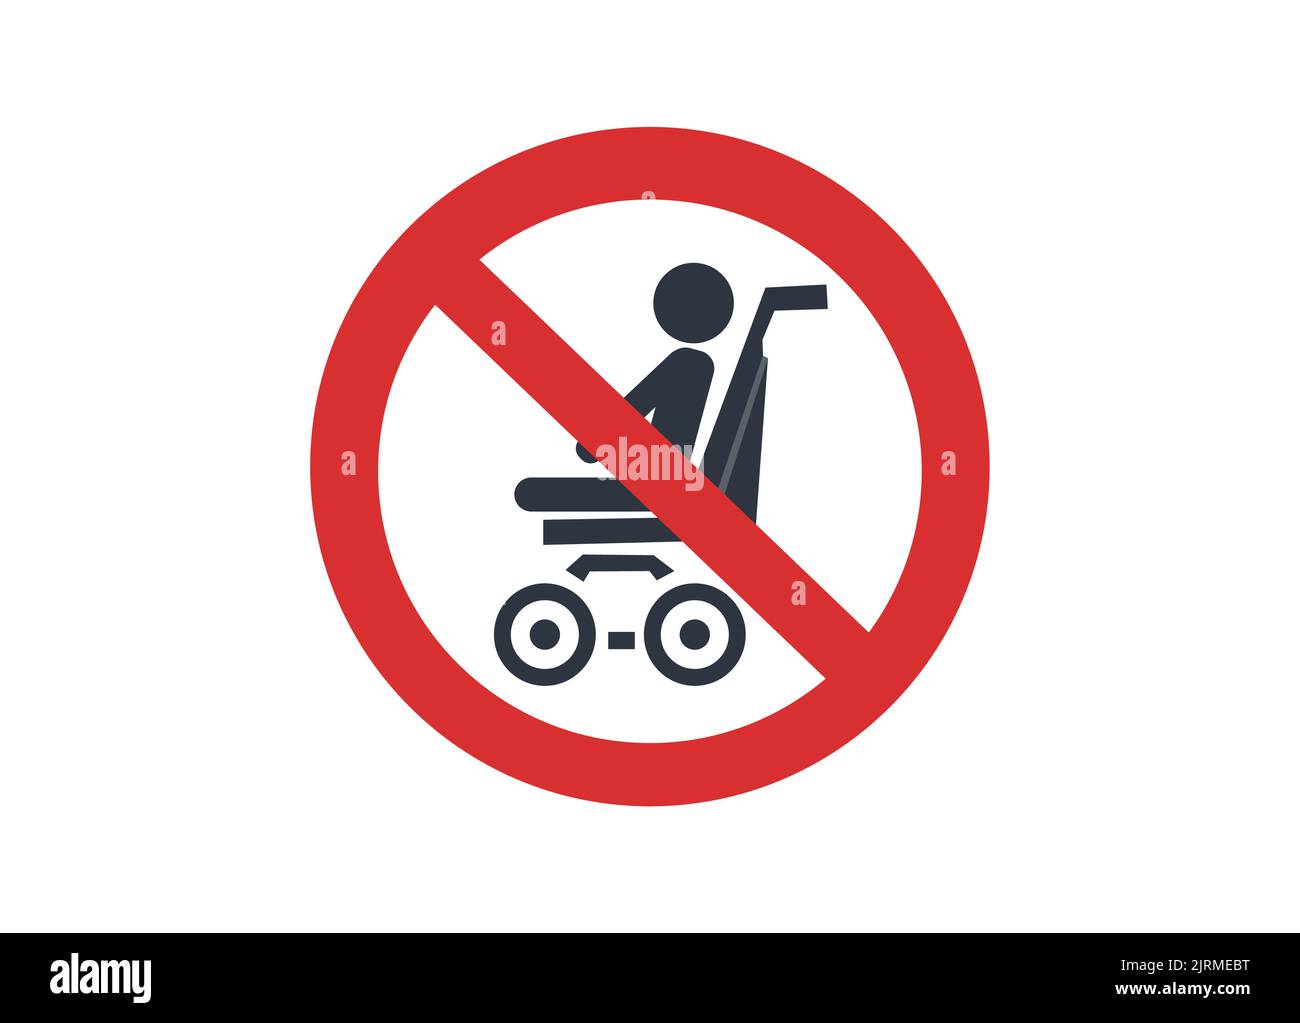 Baby trolleys or strollers are not allowed vector. Stock Vector